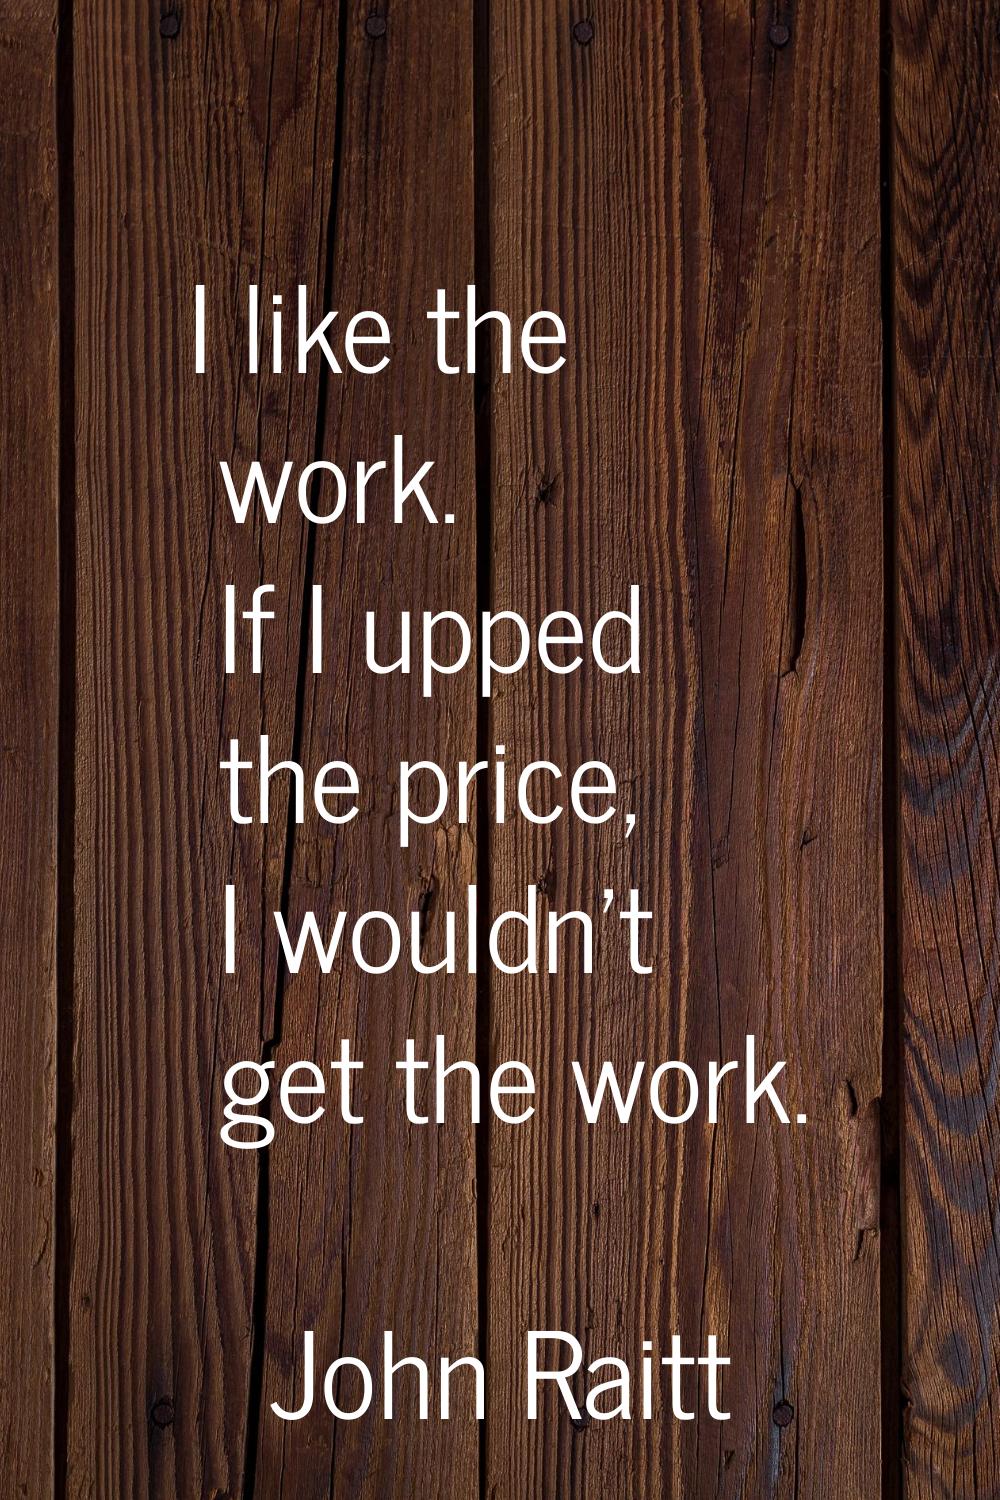 I like the work. If I upped the price, I wouldn't get the work.